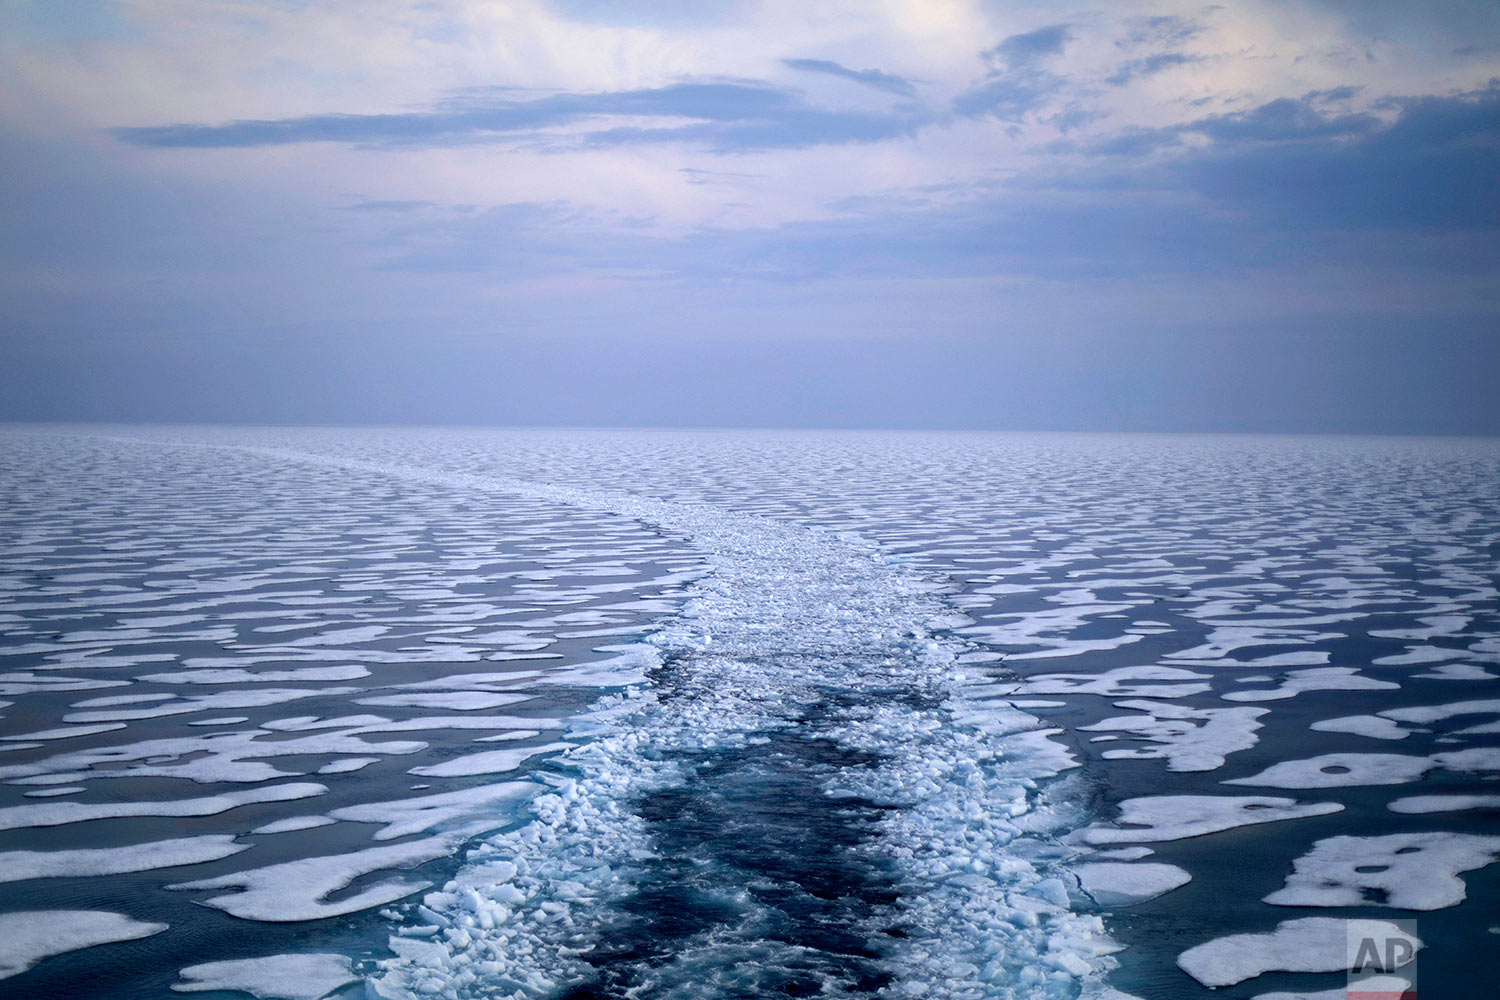  A path in the ice is left in the wake of the Finnish icebreaker MSV Nordica as it traverses the Northwest Passage through the Franklin Strait in the Canadian Arctic Archipelago Saturday, July 22, 2017. Researchers on the trip sought to observe the c